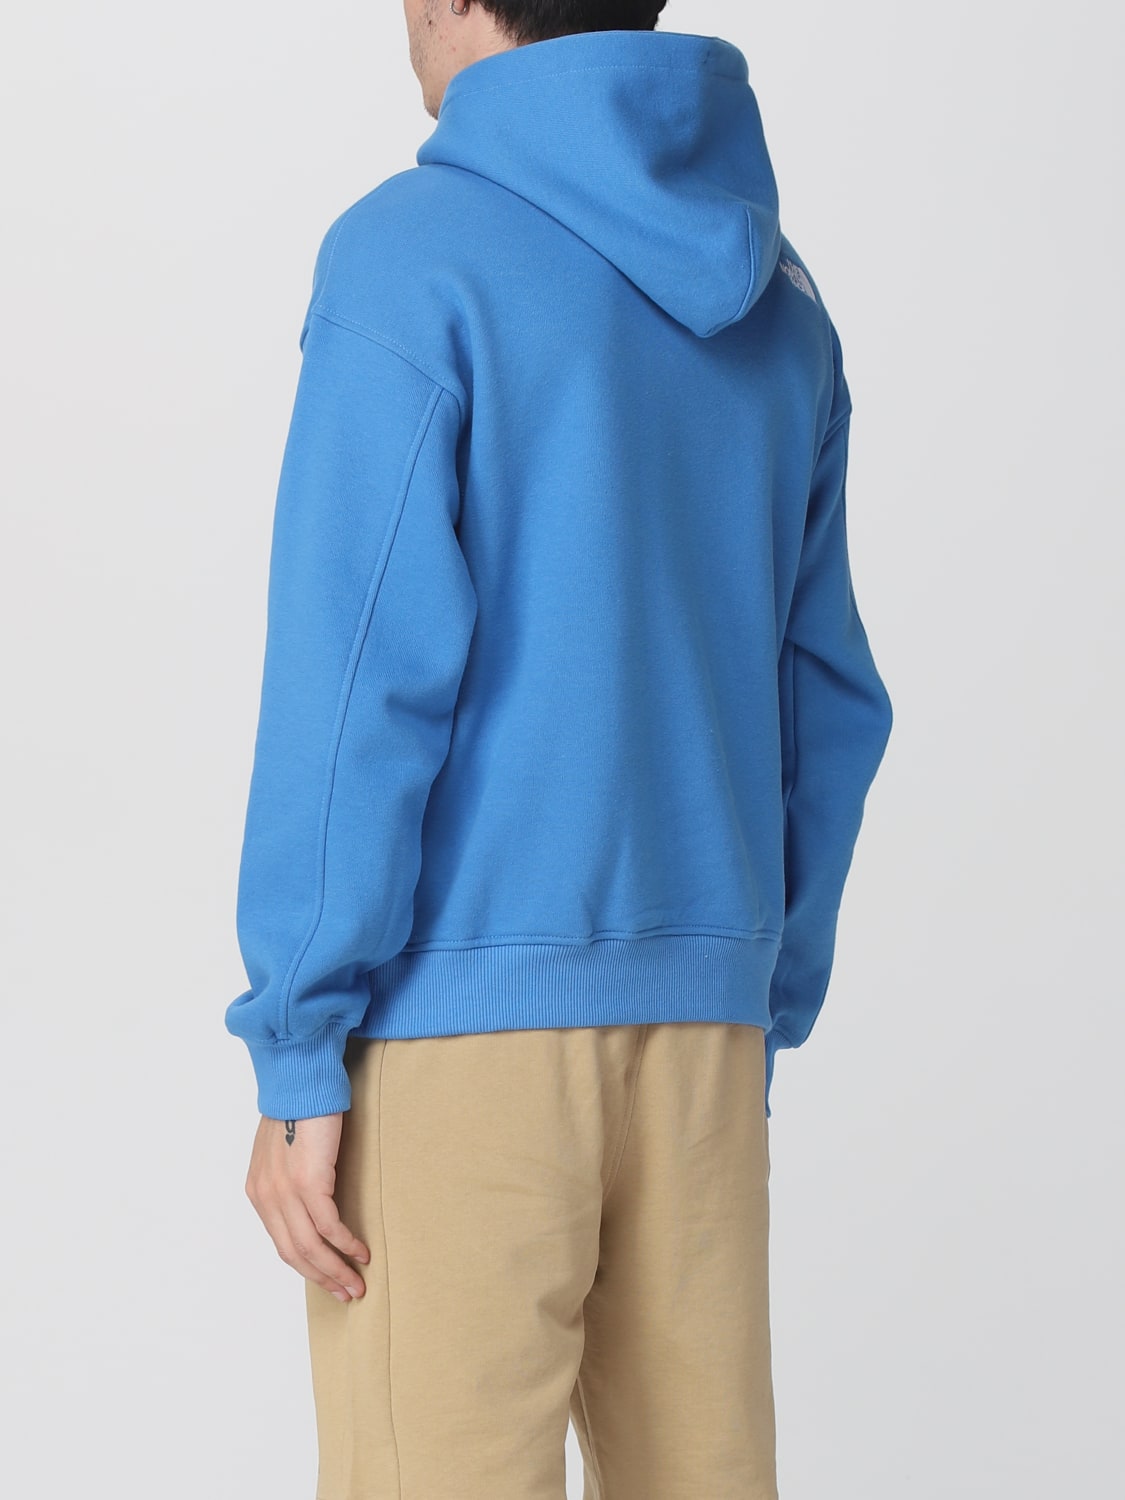 Sweatshirt The North Face: The North Face sweatshirt for man royal blue 2